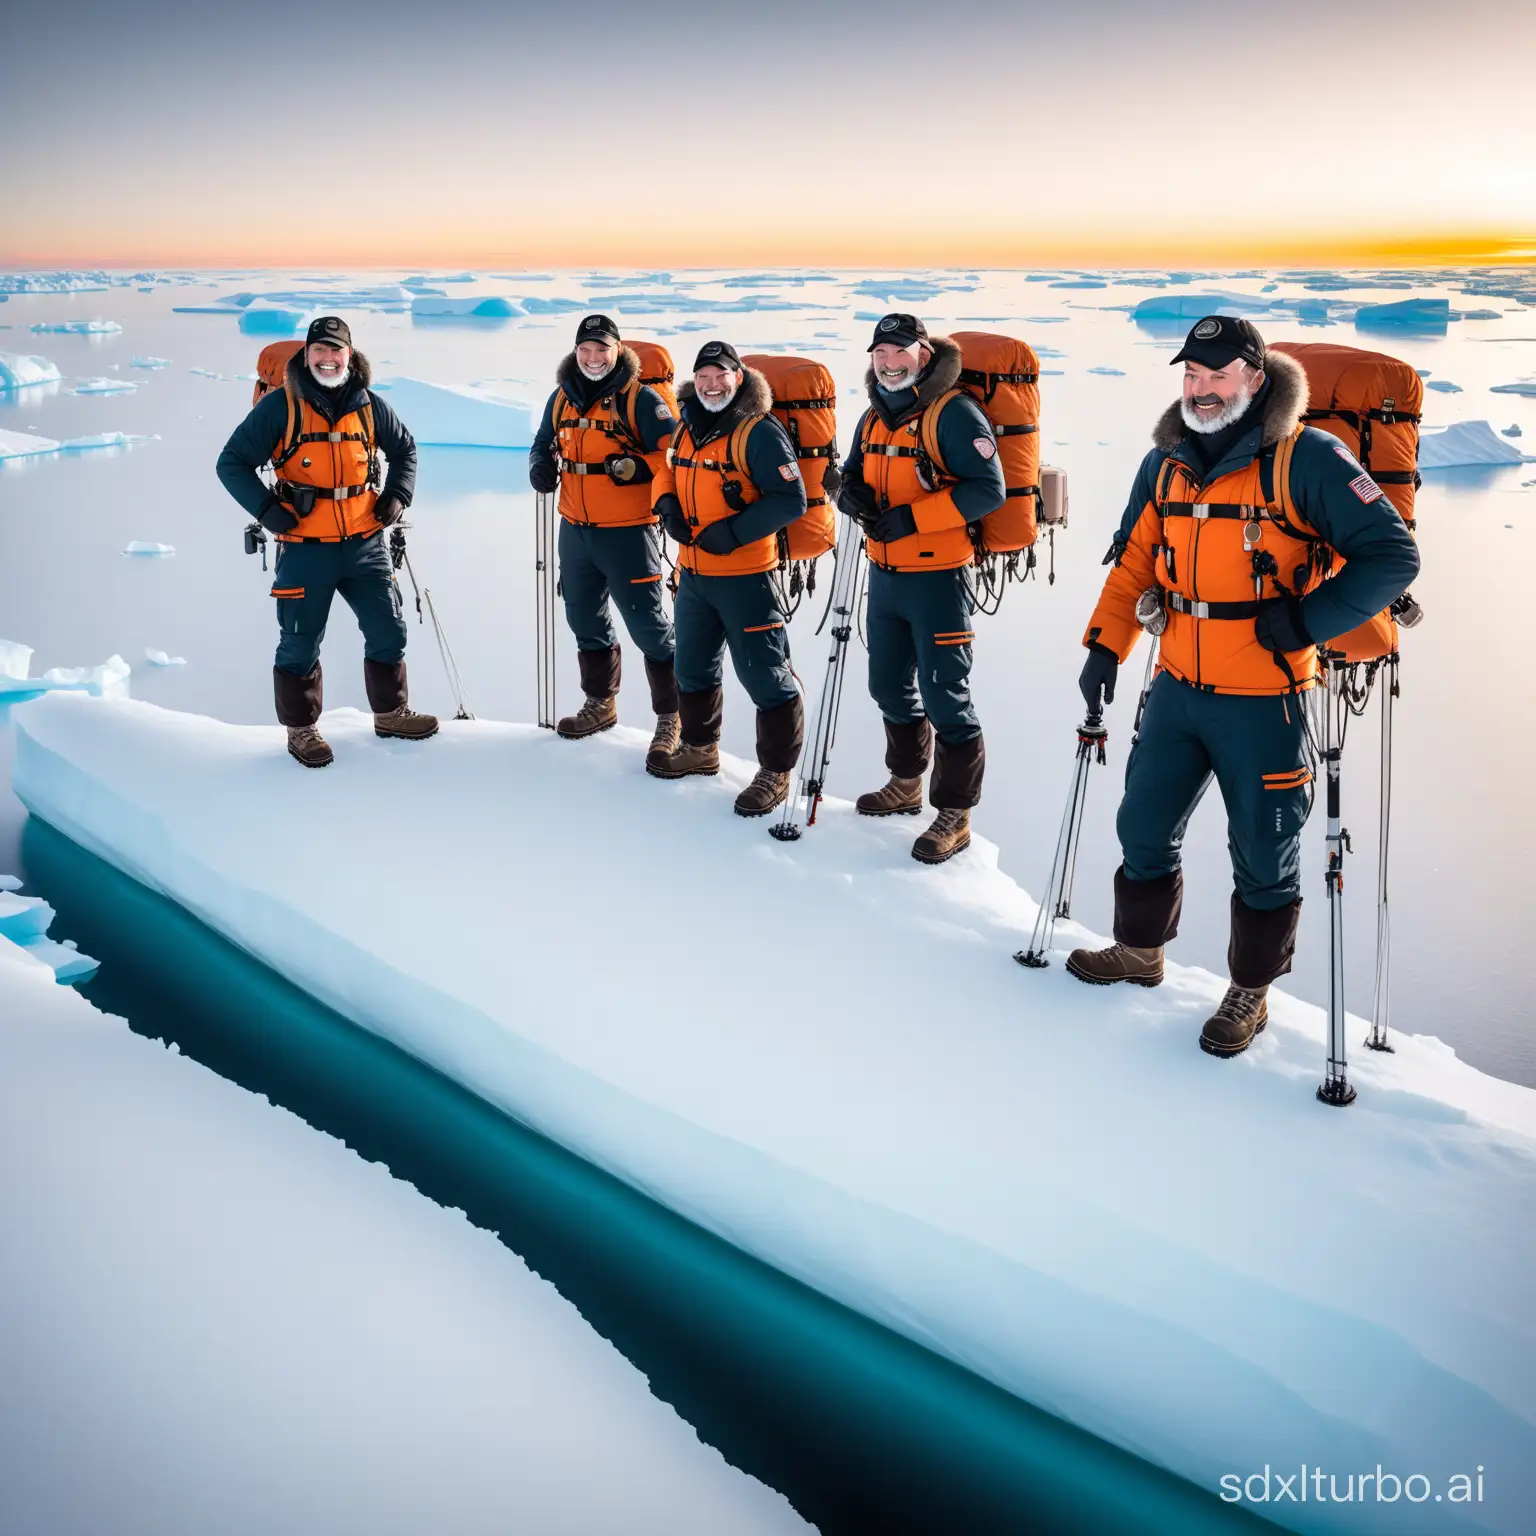 In a distant Antarctica, there is a group of brave explorers preparing for an exciting Antarctic adventure. Their captain is an experienced navigator named John, who leads a team composed of scientists, photographers, and explorers.